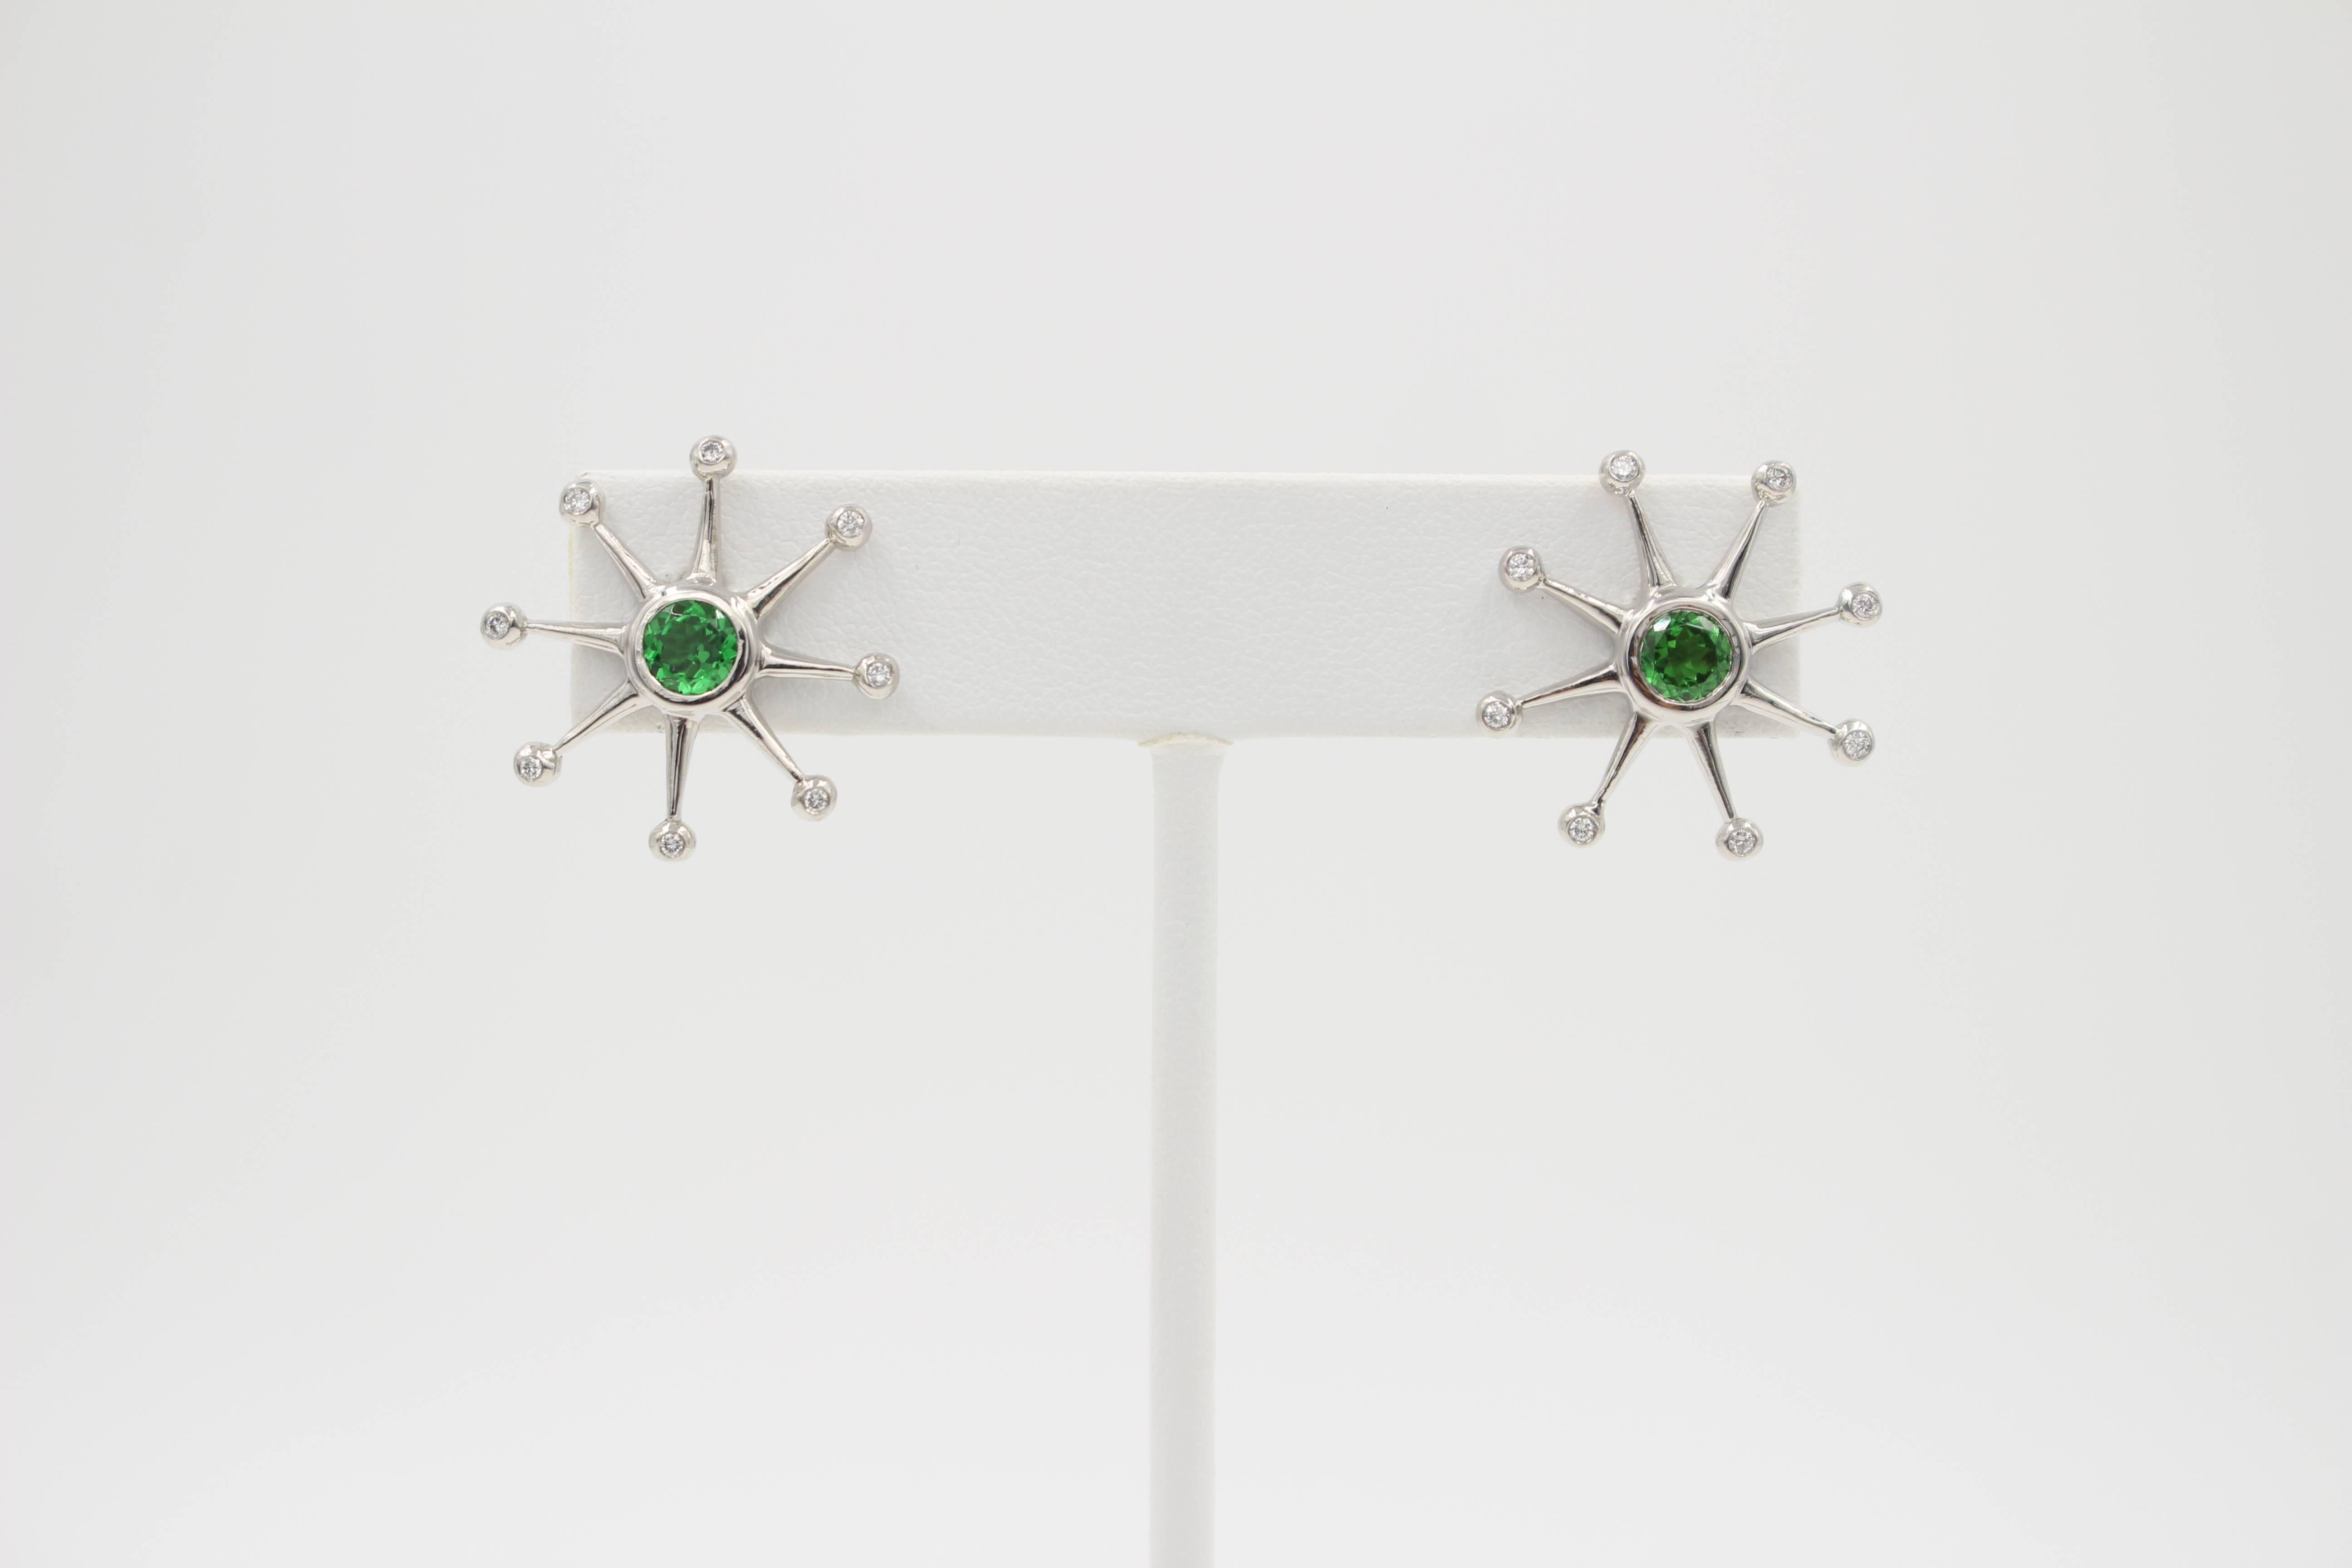 The Eight Ray Star Earring are Platinum with round brilliant cut Peridot center stones and round brilliant cut diamonds on the very tip of each star ray.  The elegant and refined earrings are a delightful accent to any ensemble whether it formal or